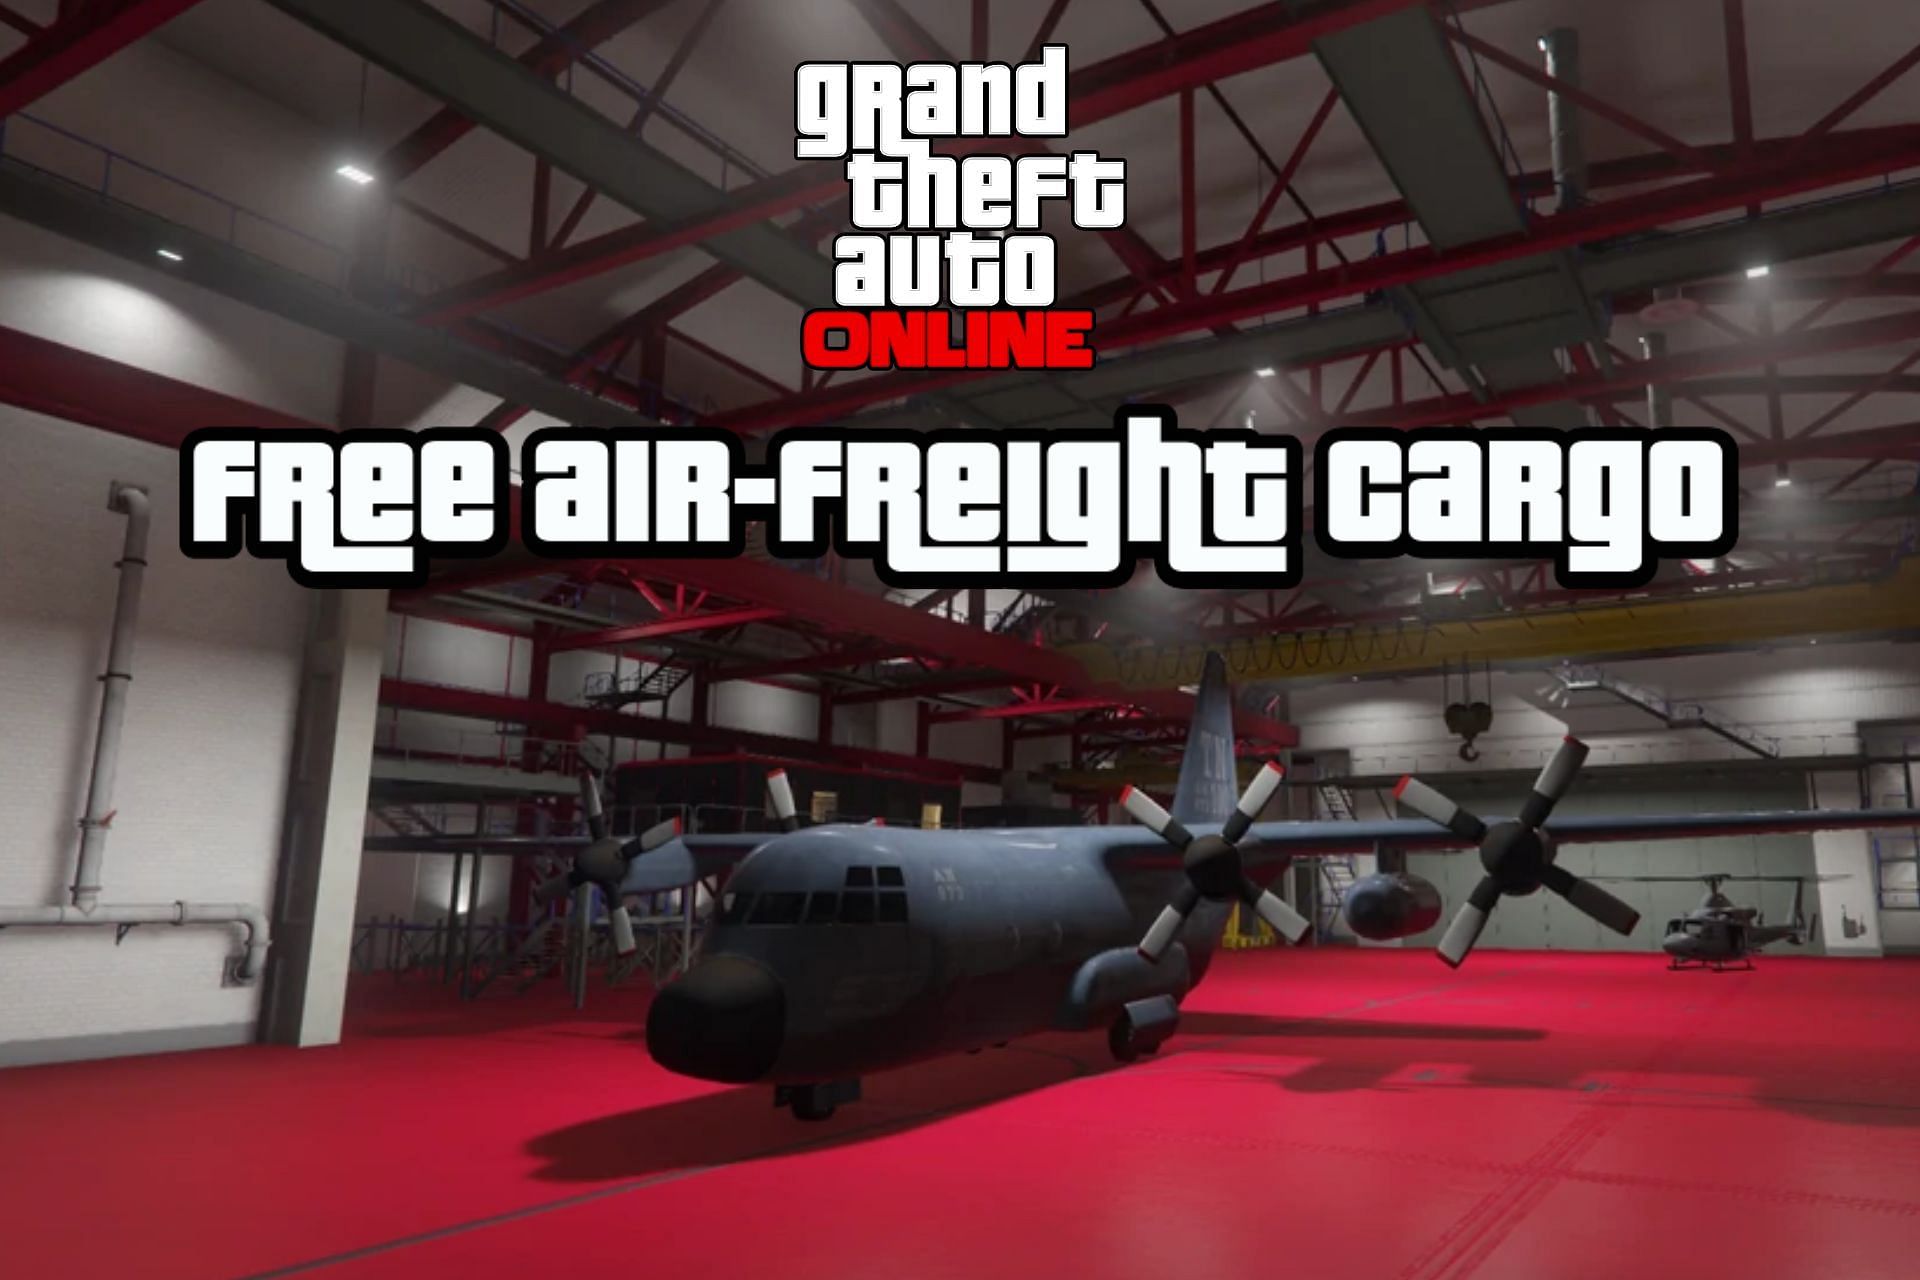 Data leakers discovered an upcoming Free Air-Freight Cargo event in GTA Online (Image via Rockstar Games)